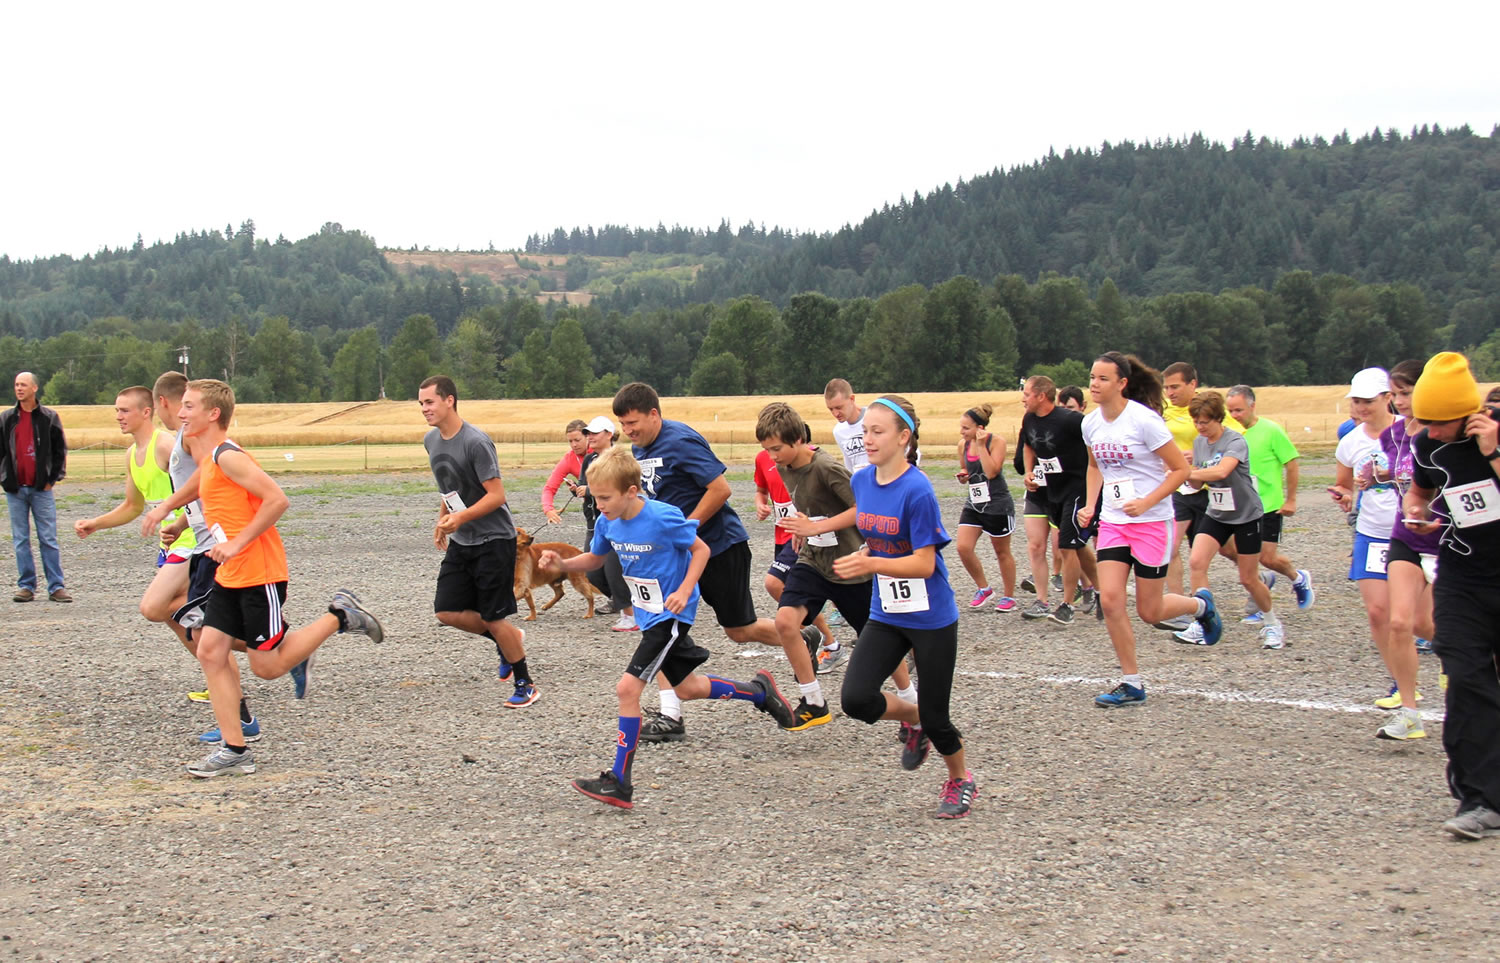 Woodland: Racers run to raise money for the Clark County Food Bank during the Race Against Hunger event held July 27 at Holland America Bulb Farms in Woodland.